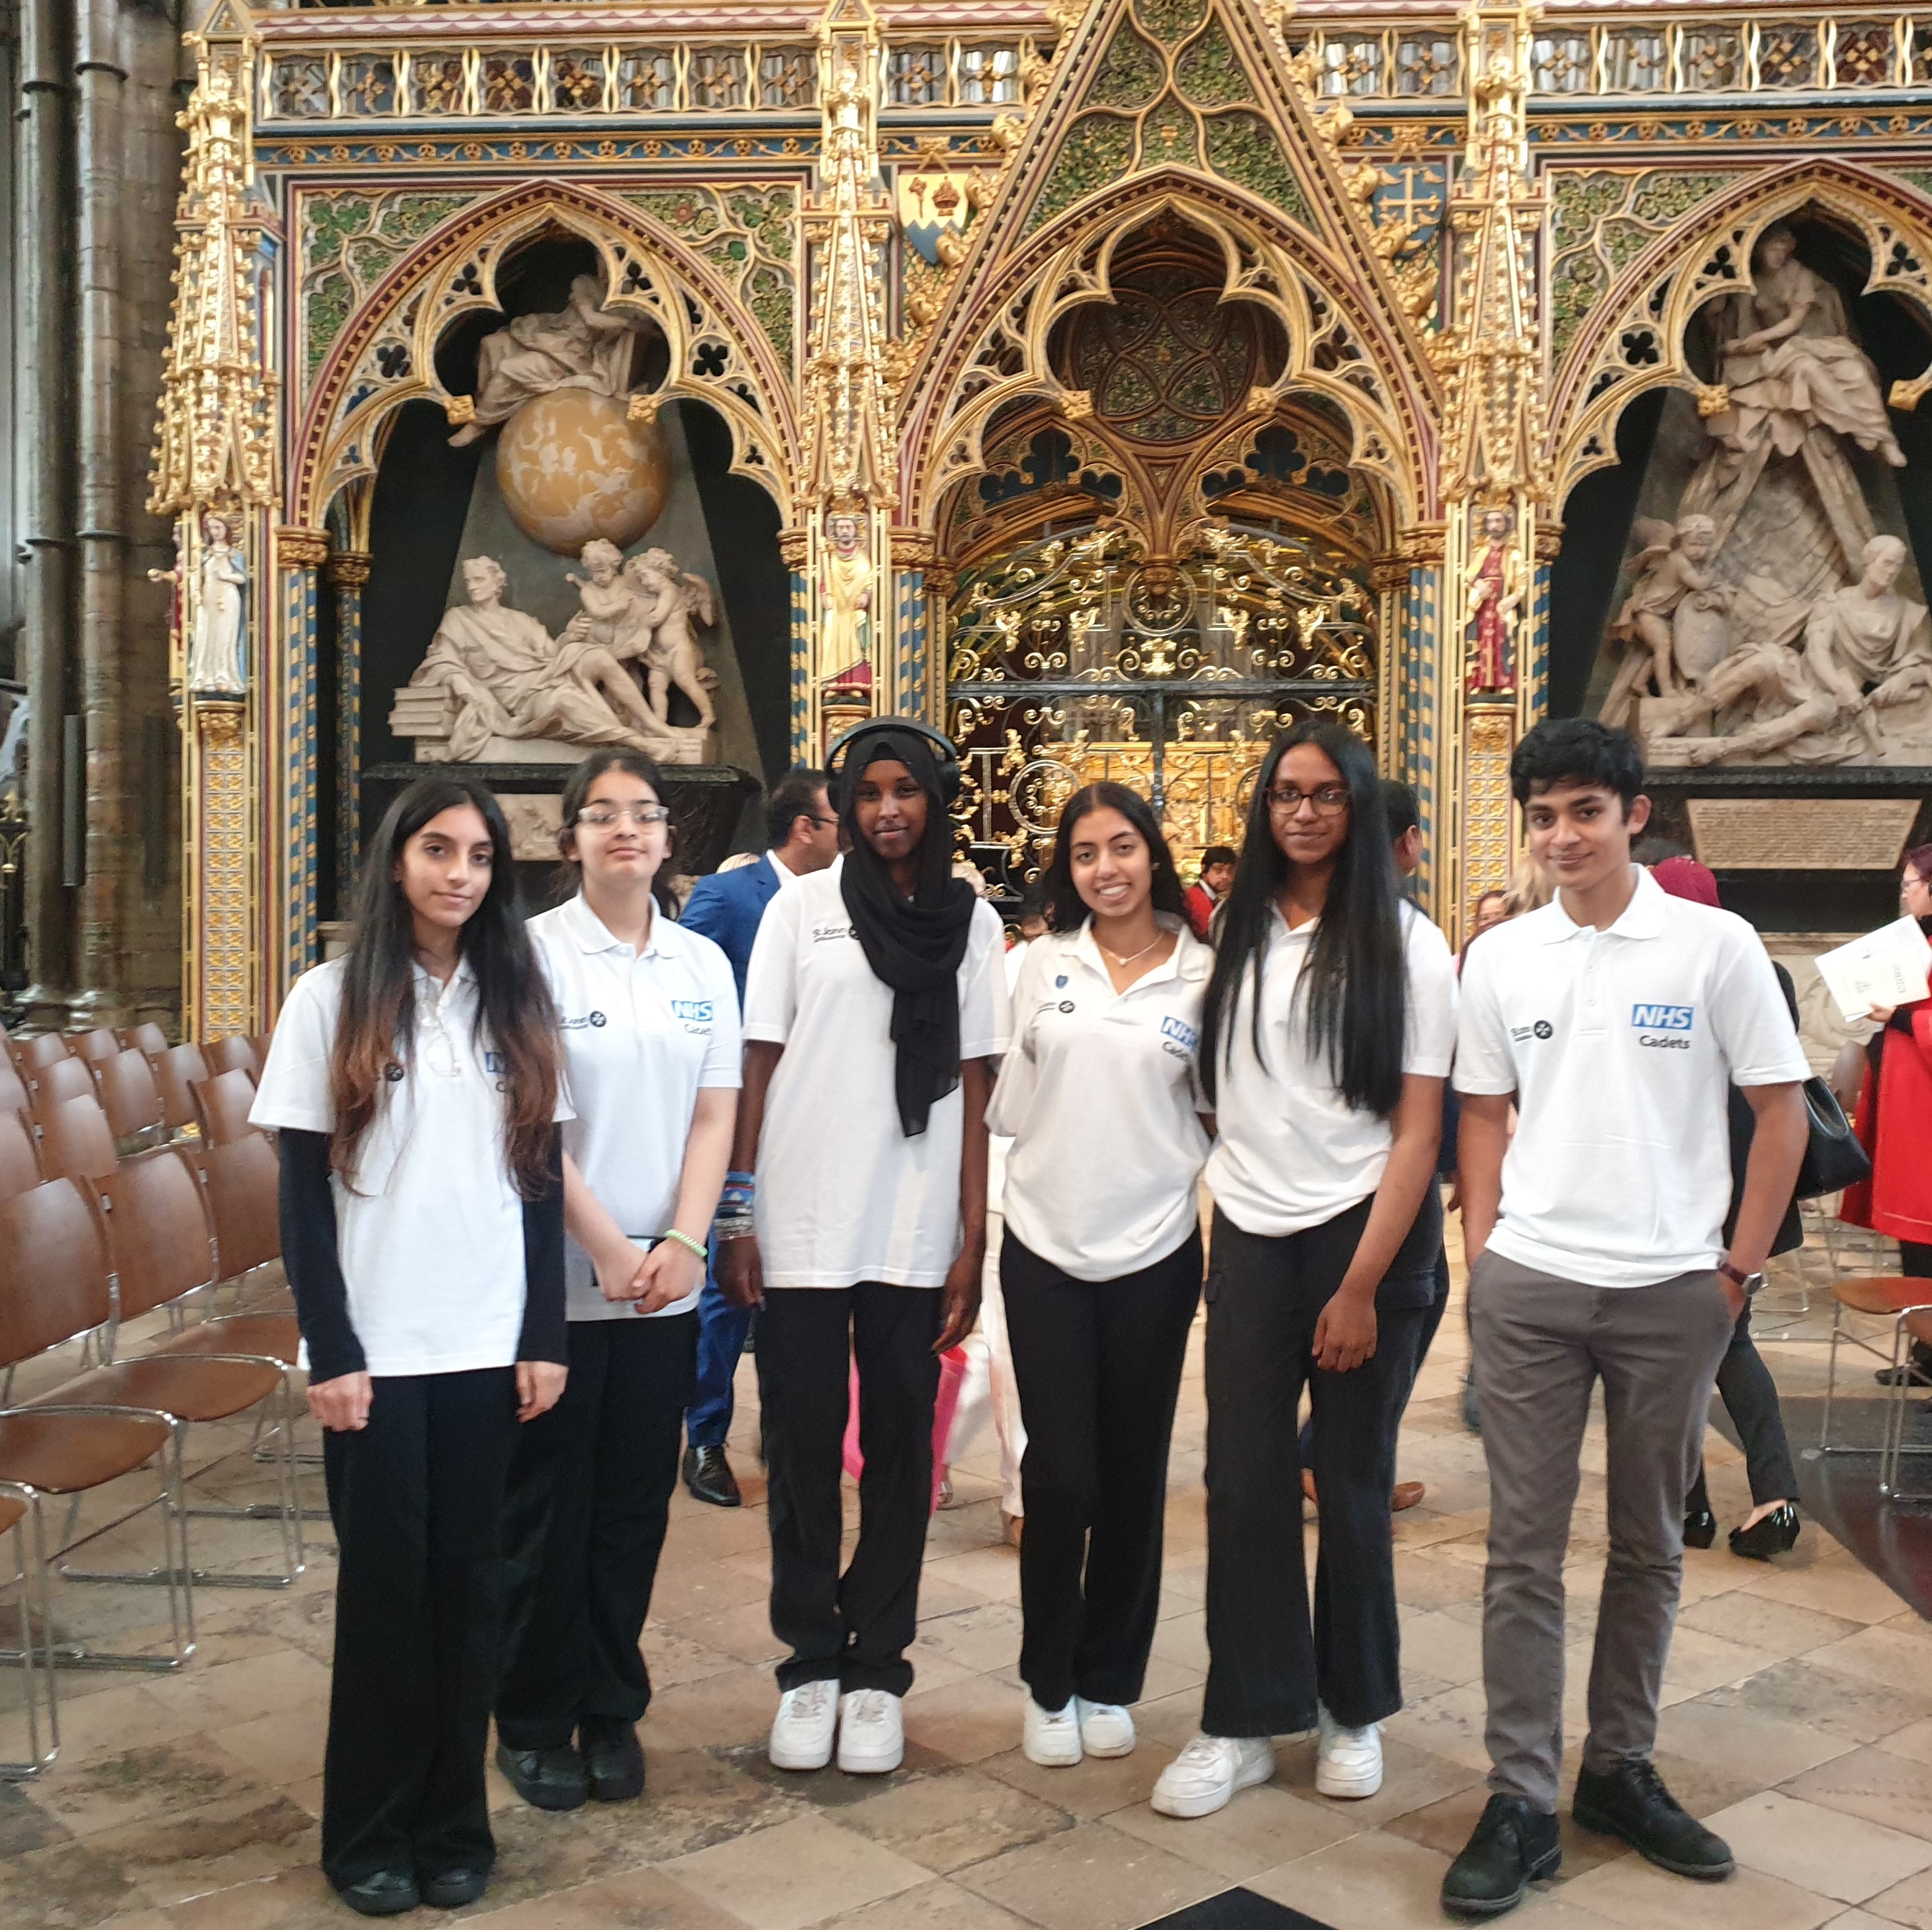 St John Ambulance NHS Cadets at Westminster Abbey event